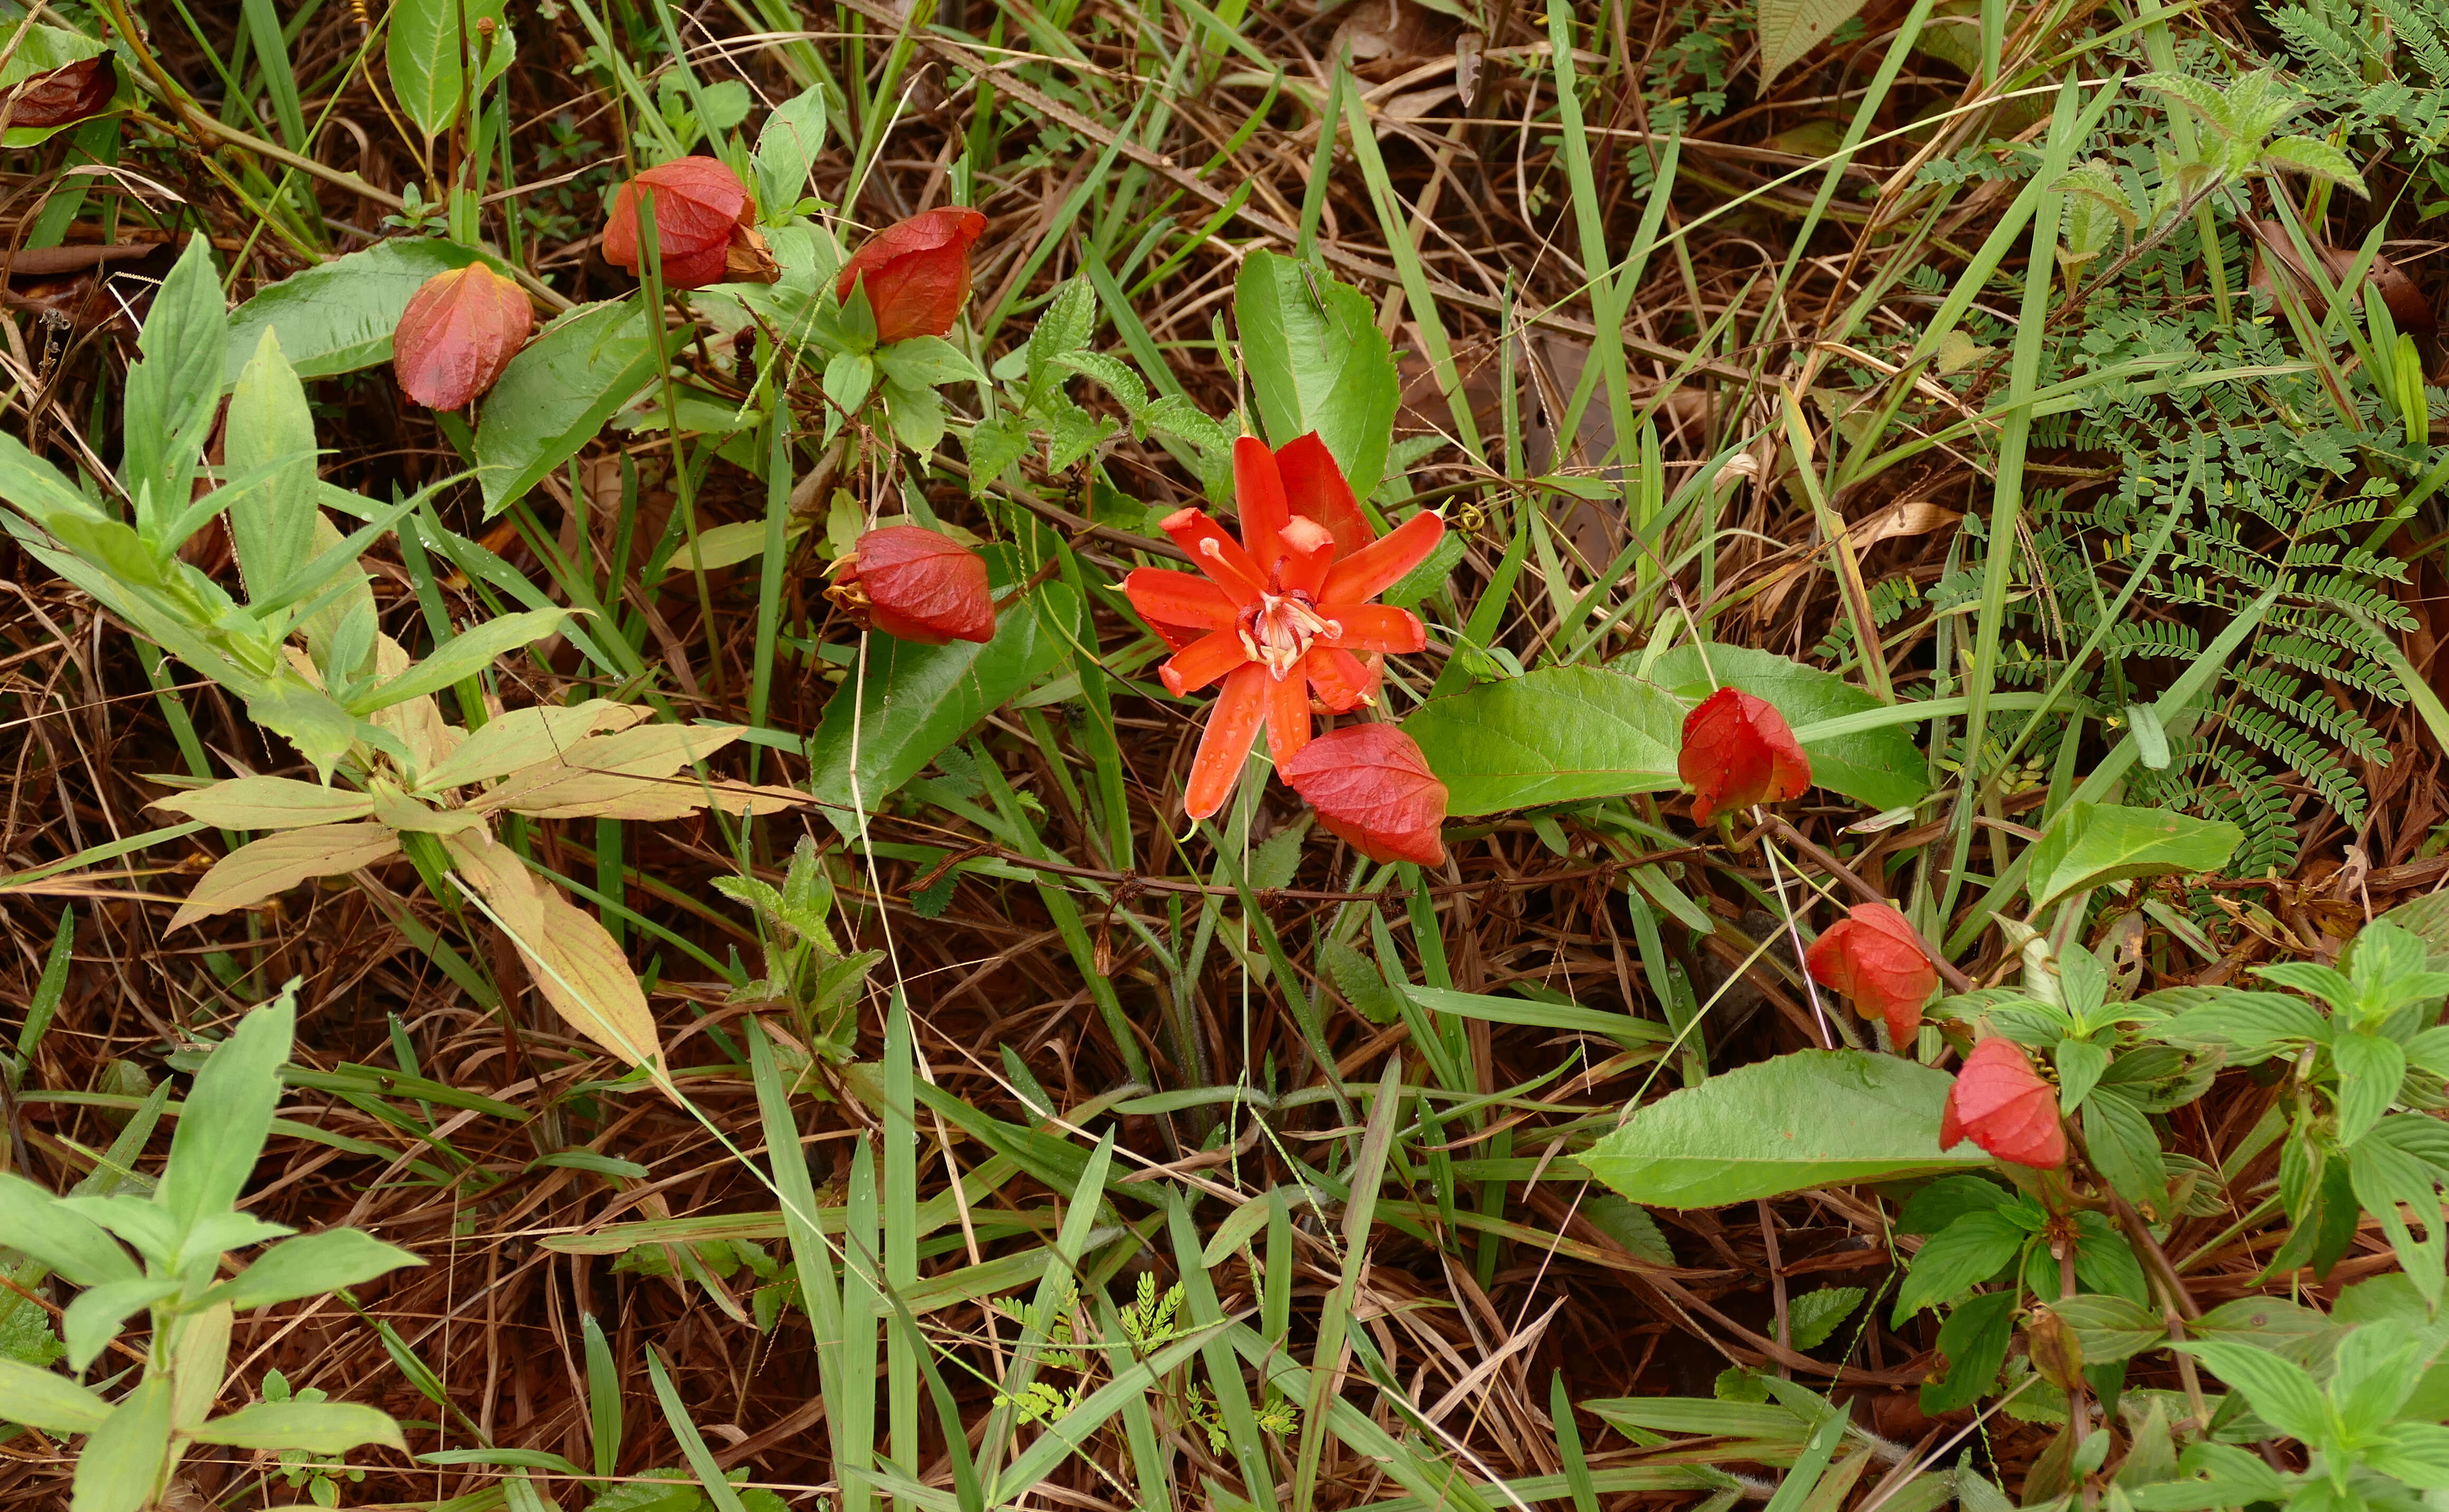 Image of scarlet passionflower